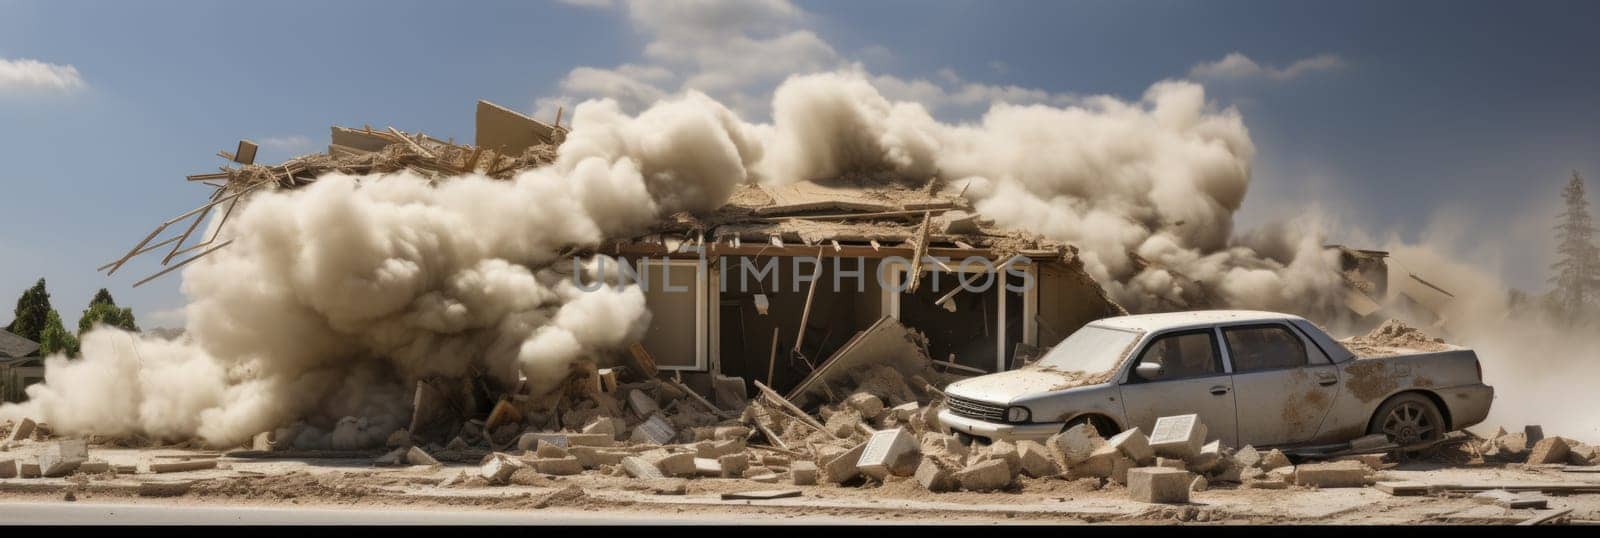 A car is parked in front of a building that has been demolished, showcasing the aftermath of a house demolition.